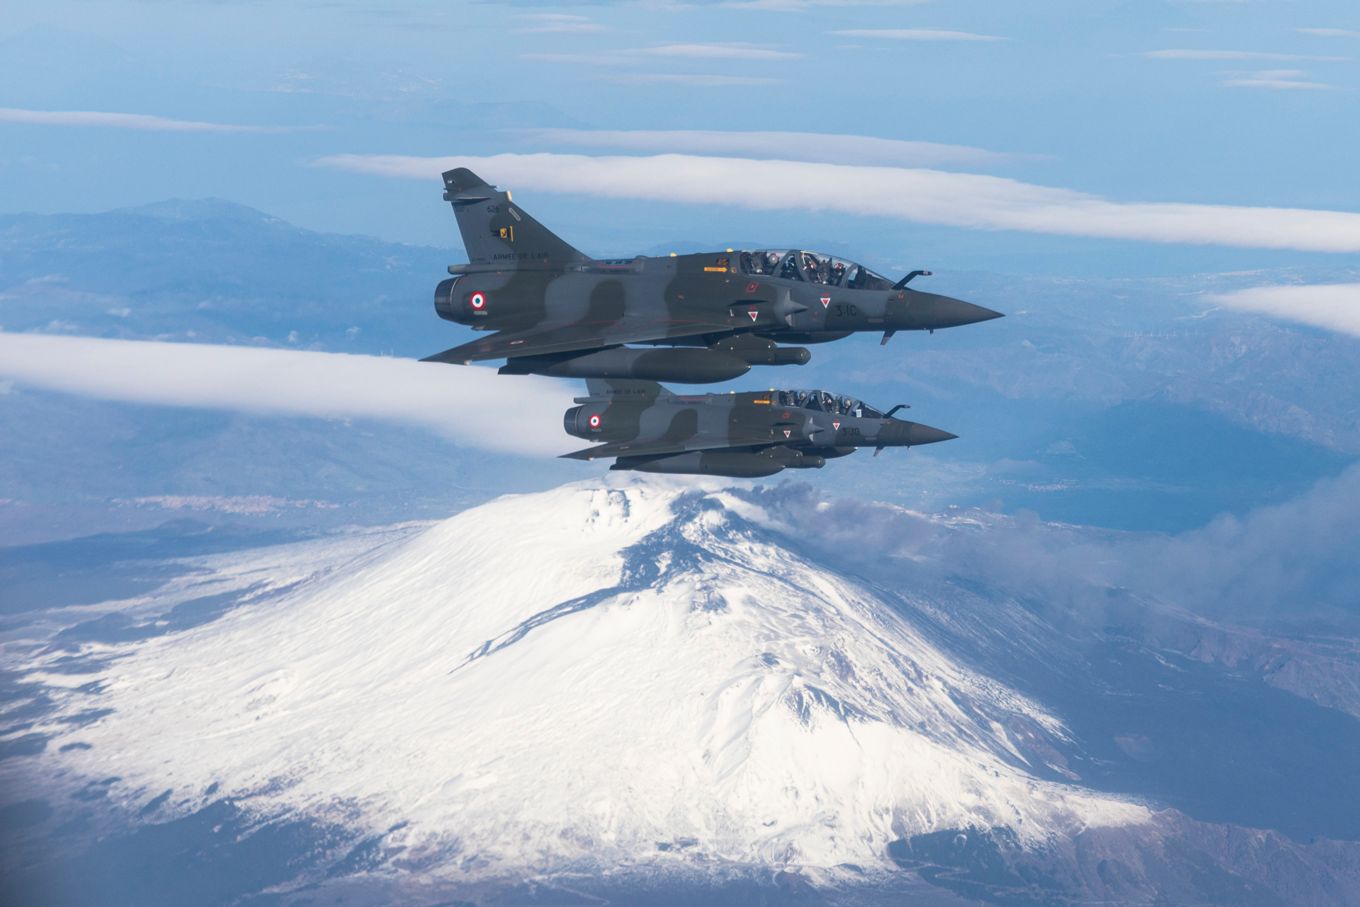 Pictured, Armee de l’air Mirage 2000 fighters en route to Africa